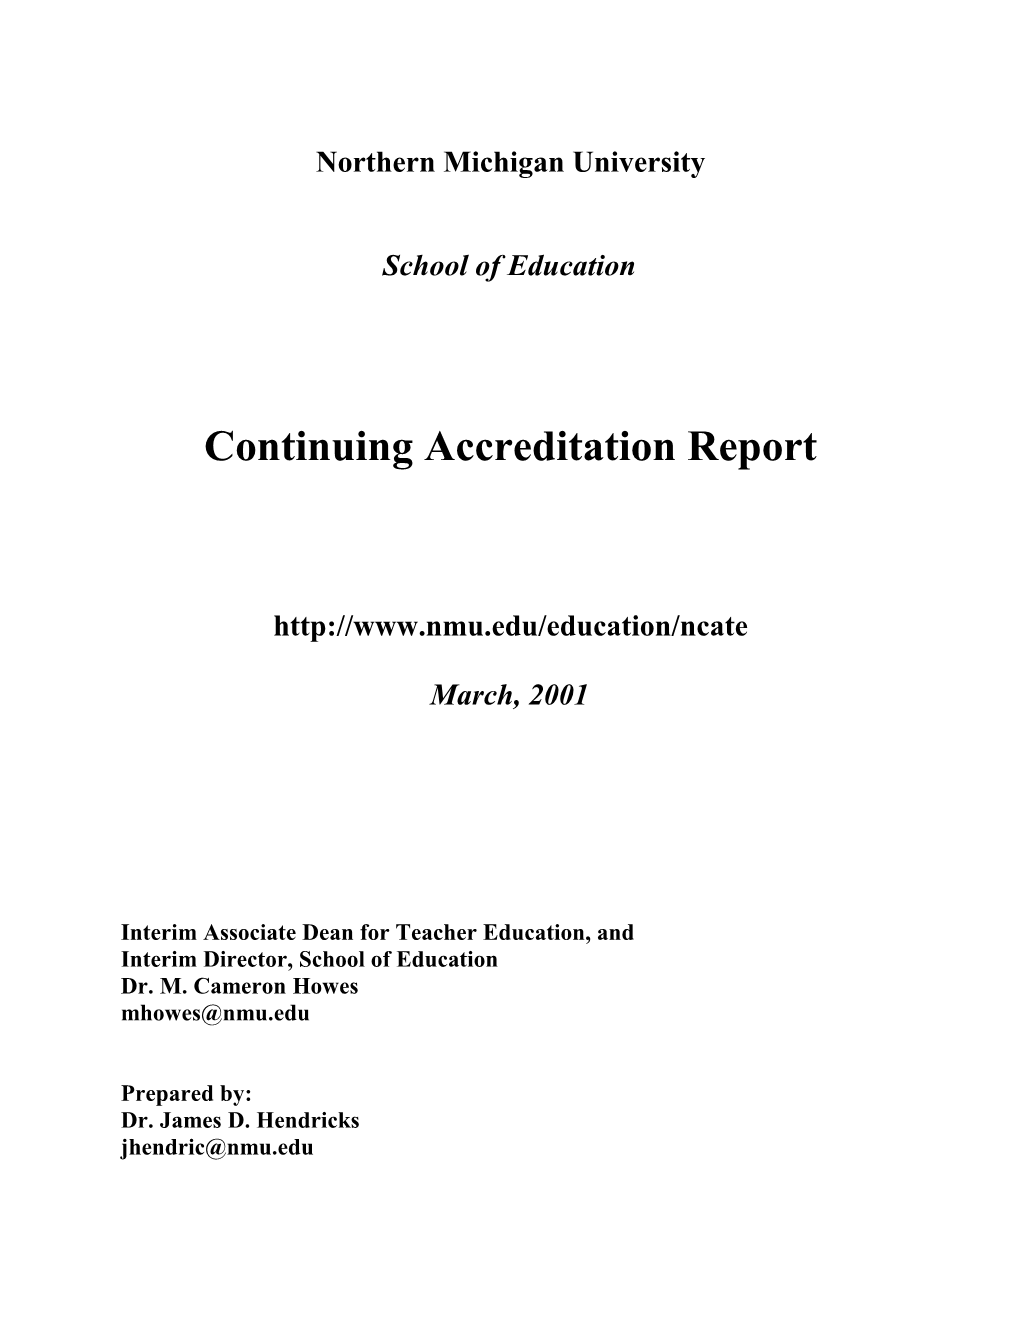 NCATE Continuing Accreditation Report